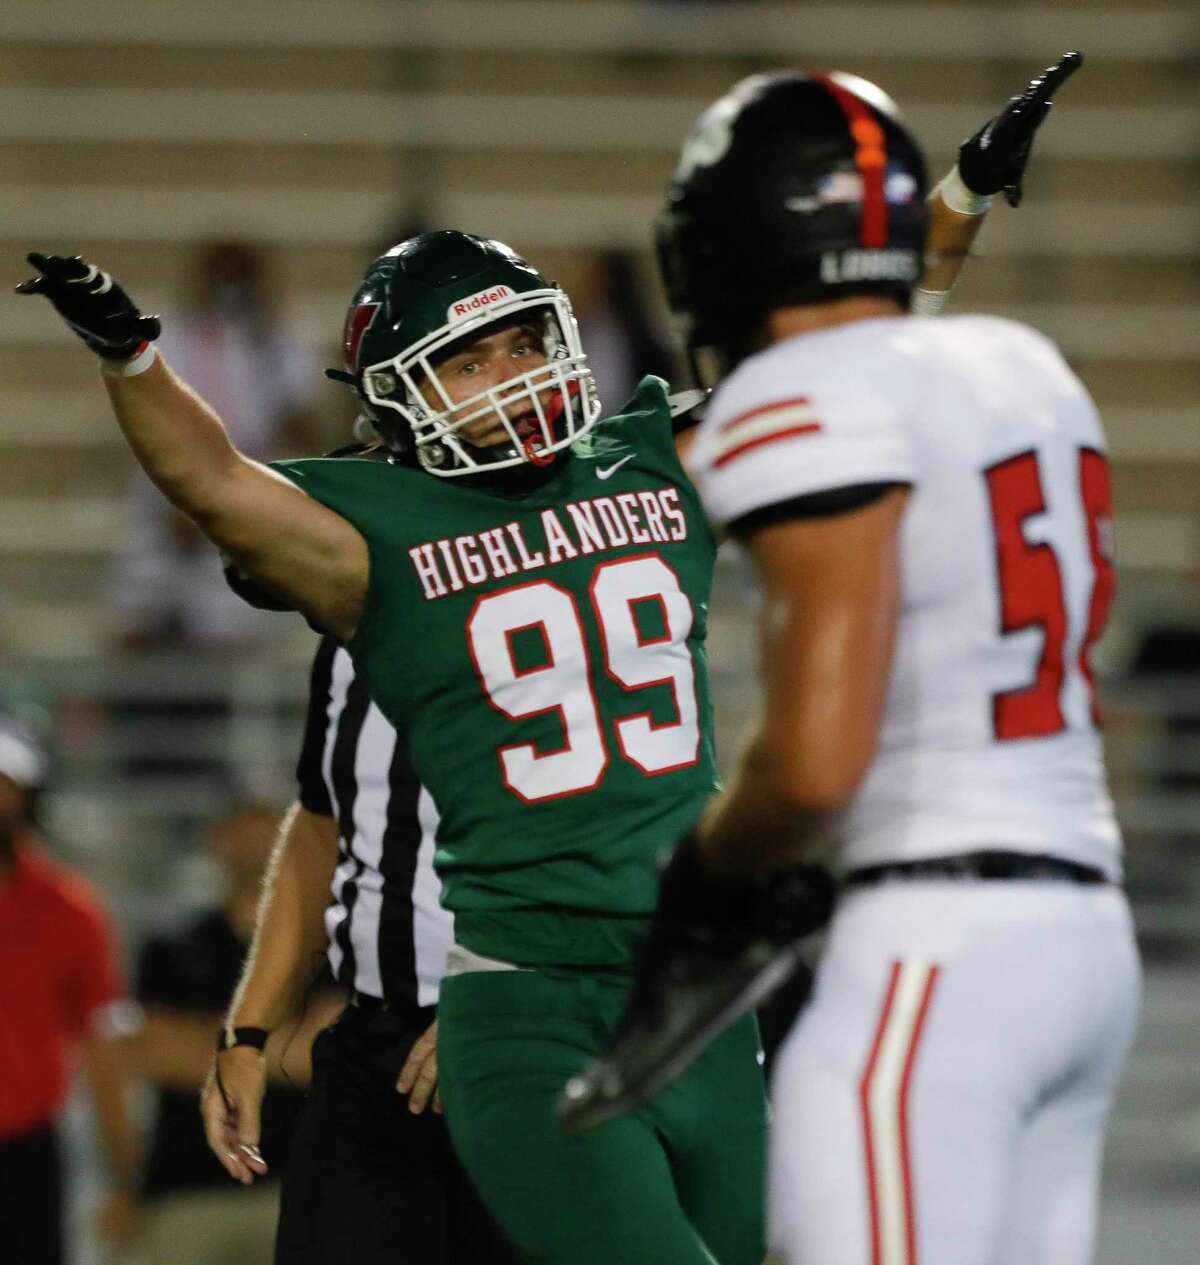 The Woodlands defensive linemen John Podowski (99) reacts after sacking Langham Creek quarterback Tanner Murray (7) with linebacker David Ifeanyi (18) during the first quarter of a non-district high school football game at Woodforest Bank Stadium, Thursday, Aug. 26, 2021, in Shenandoah.